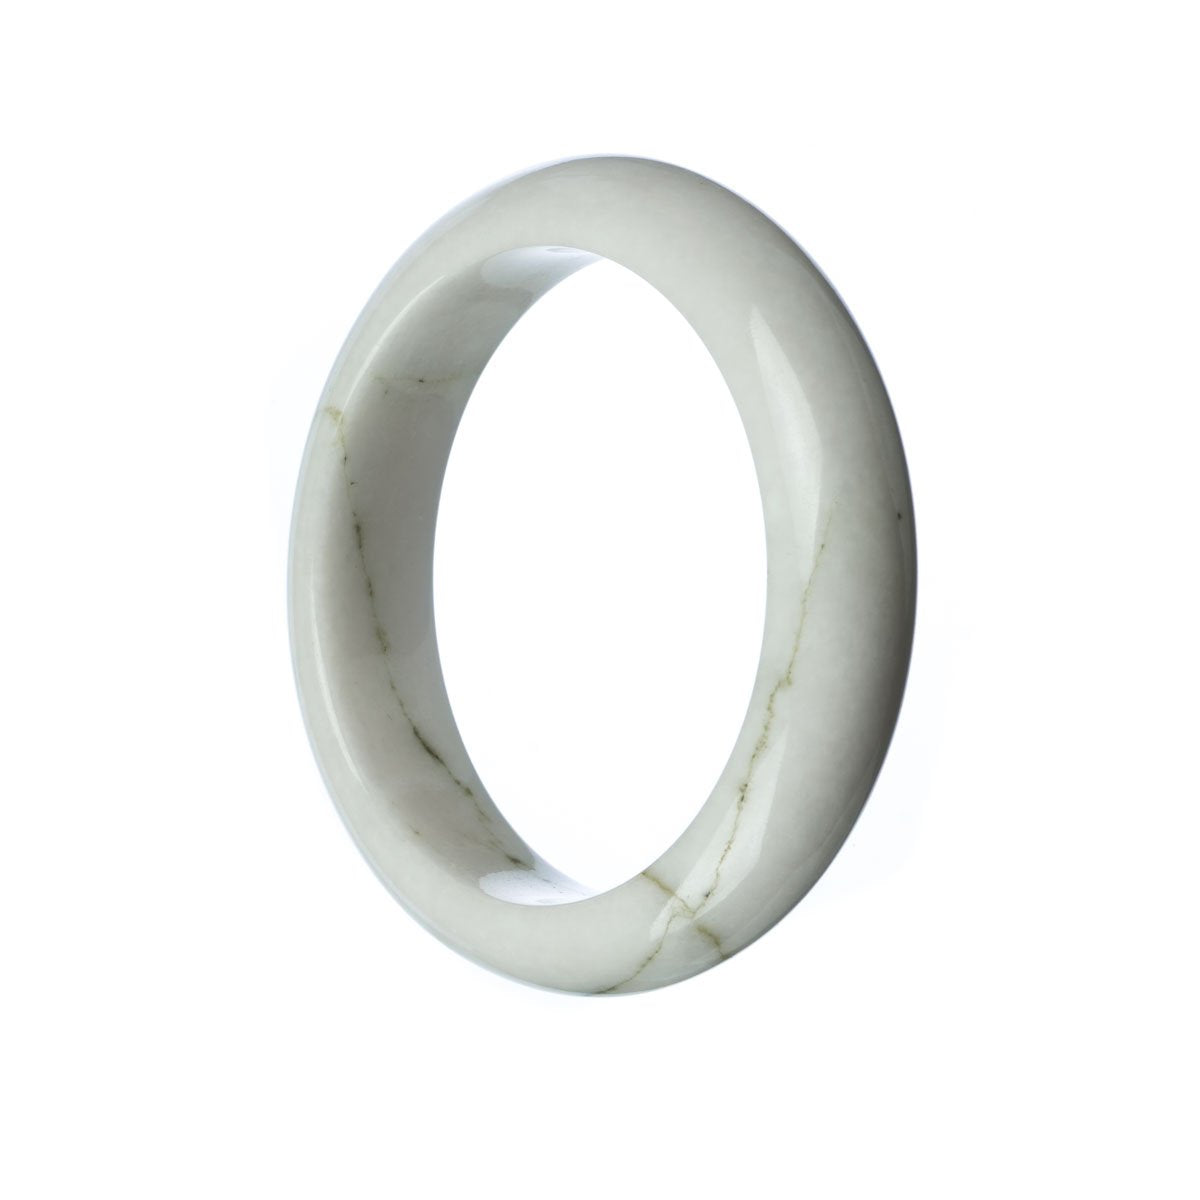 A stunning Grade A White Burmese Jade Bangle Bracelet featuring a 58mm Half Moon design. This elegant piece is certified and crafted by MAYS.